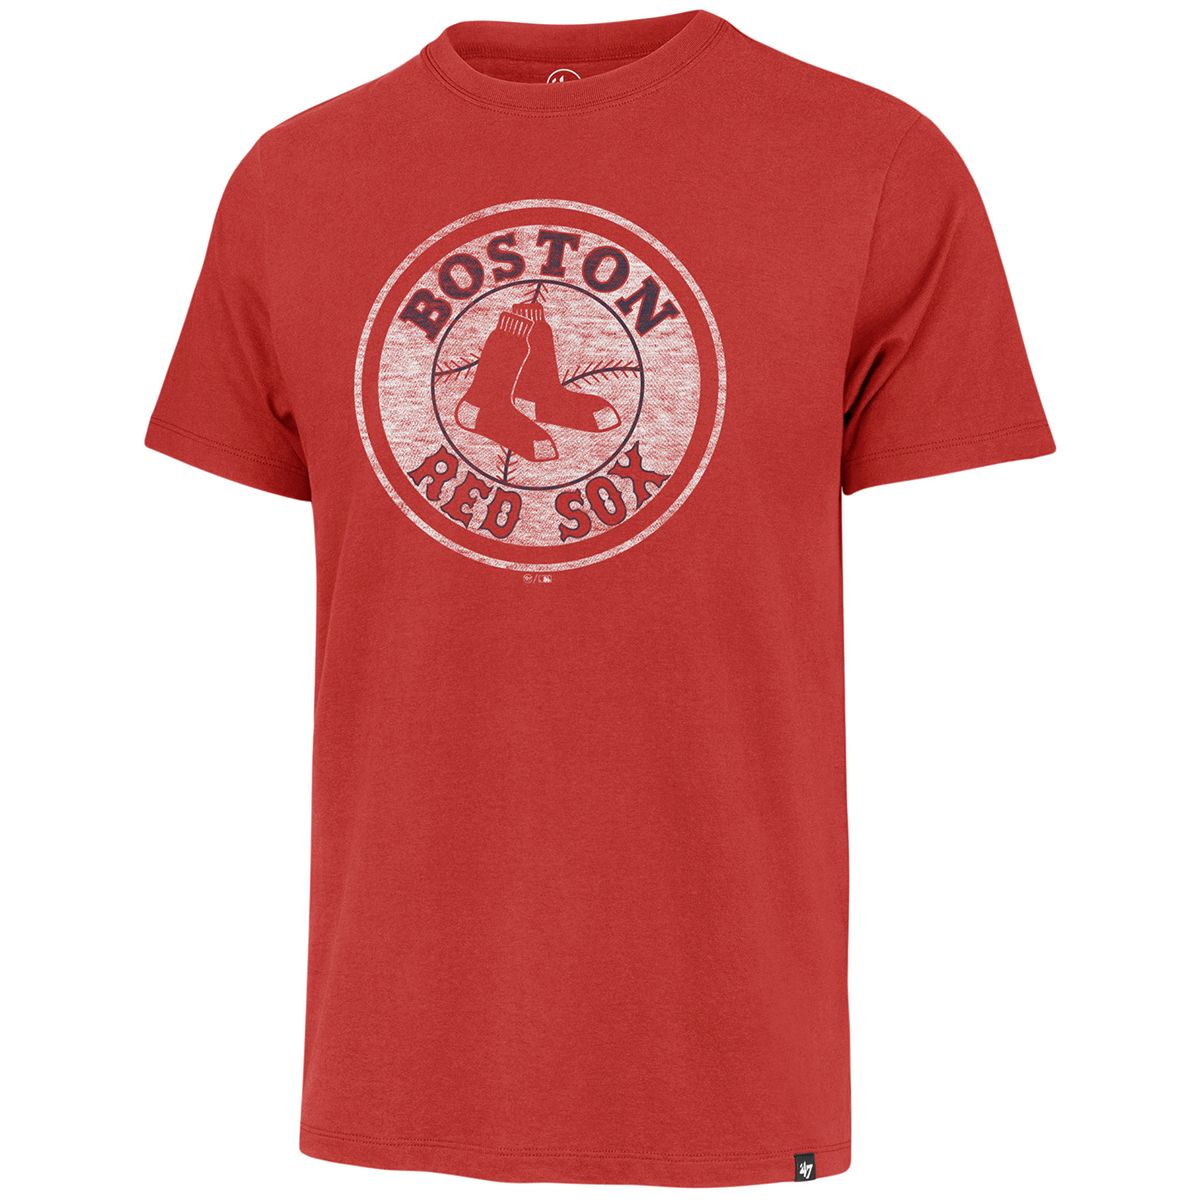 Womens MLB Official Camo Red Sox T-Shirt